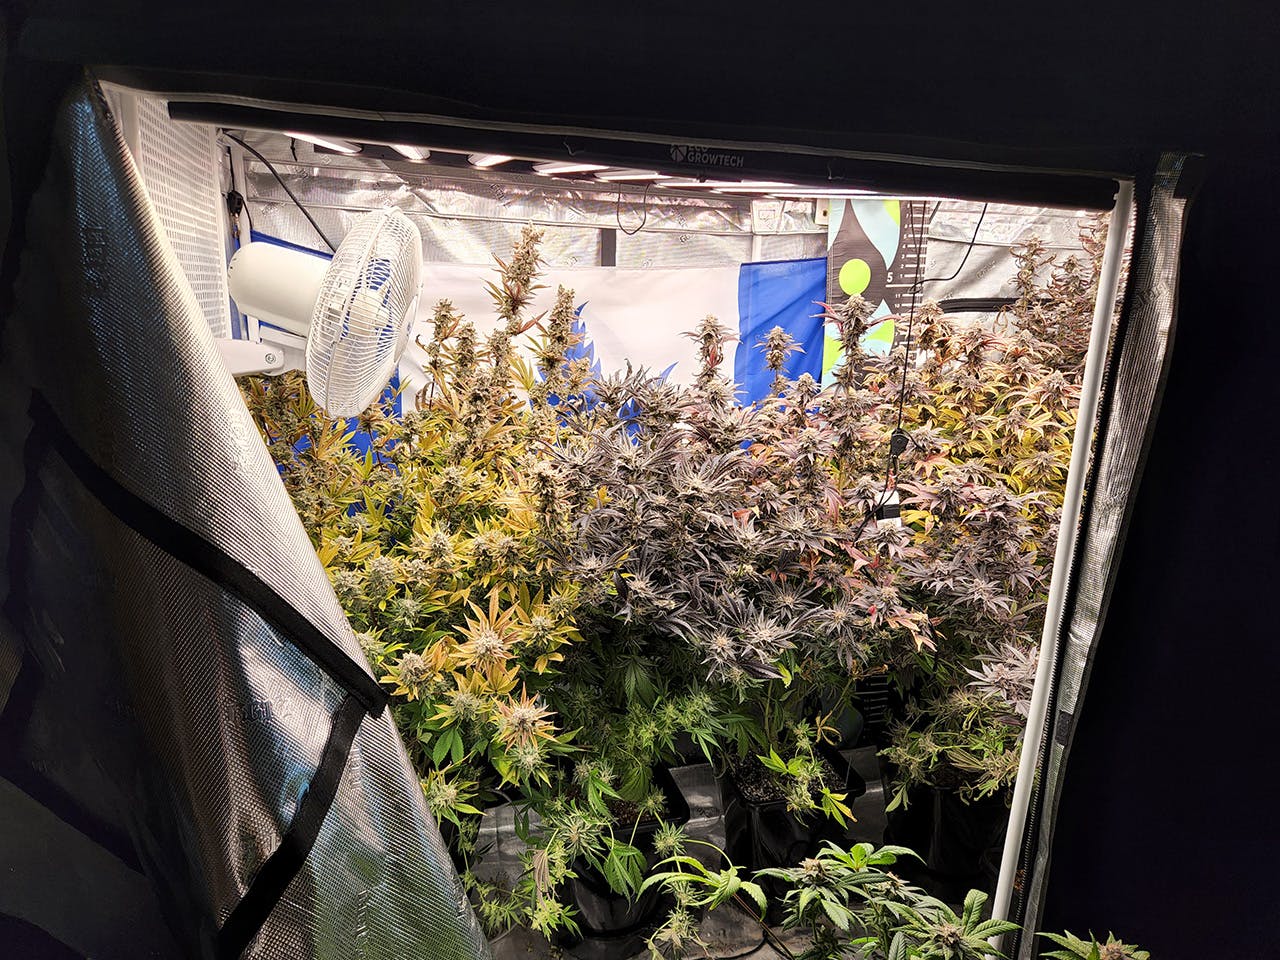 picture of bountiful cannabis plants in a grow tent that are ready for harvest